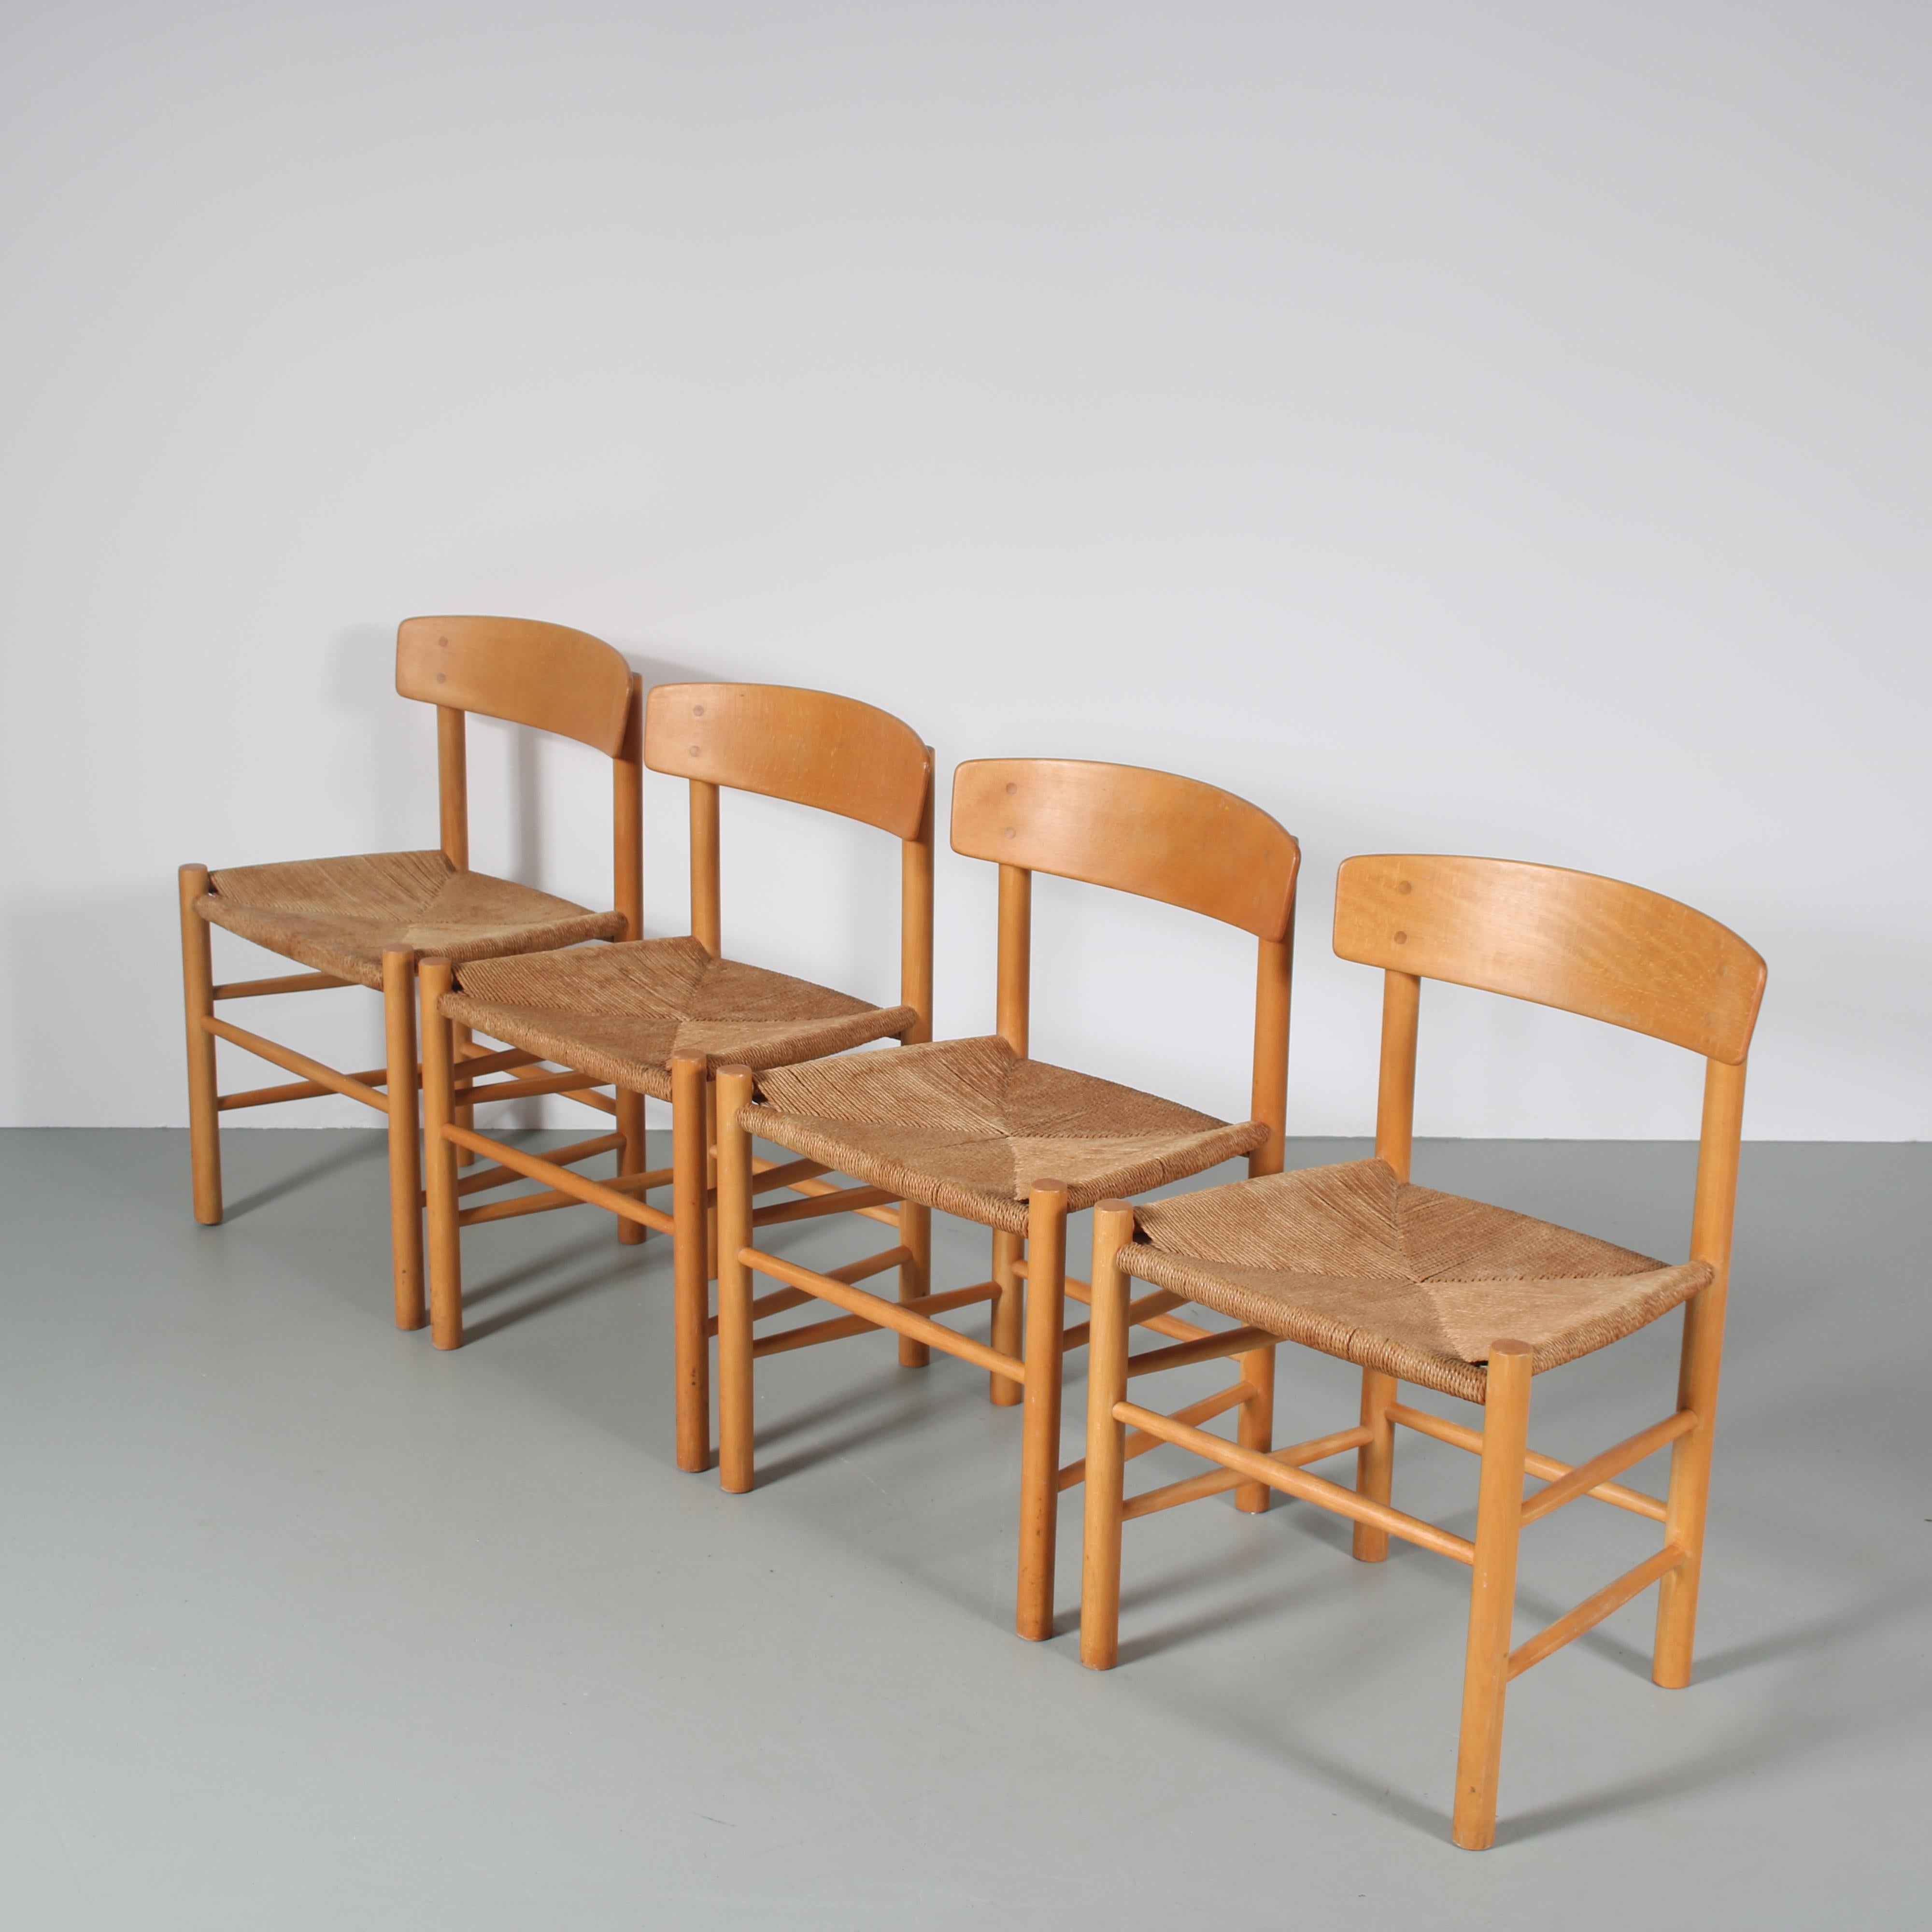 A fantastic set of four “Shaker” dining chairs by Borge Mogensen for FDB Mobler, Denmark 1960.

Made of high quality beech wood with papercord upholstery. These chairs have a fantastic Scandinavian modern style and are highly recognizable pieces